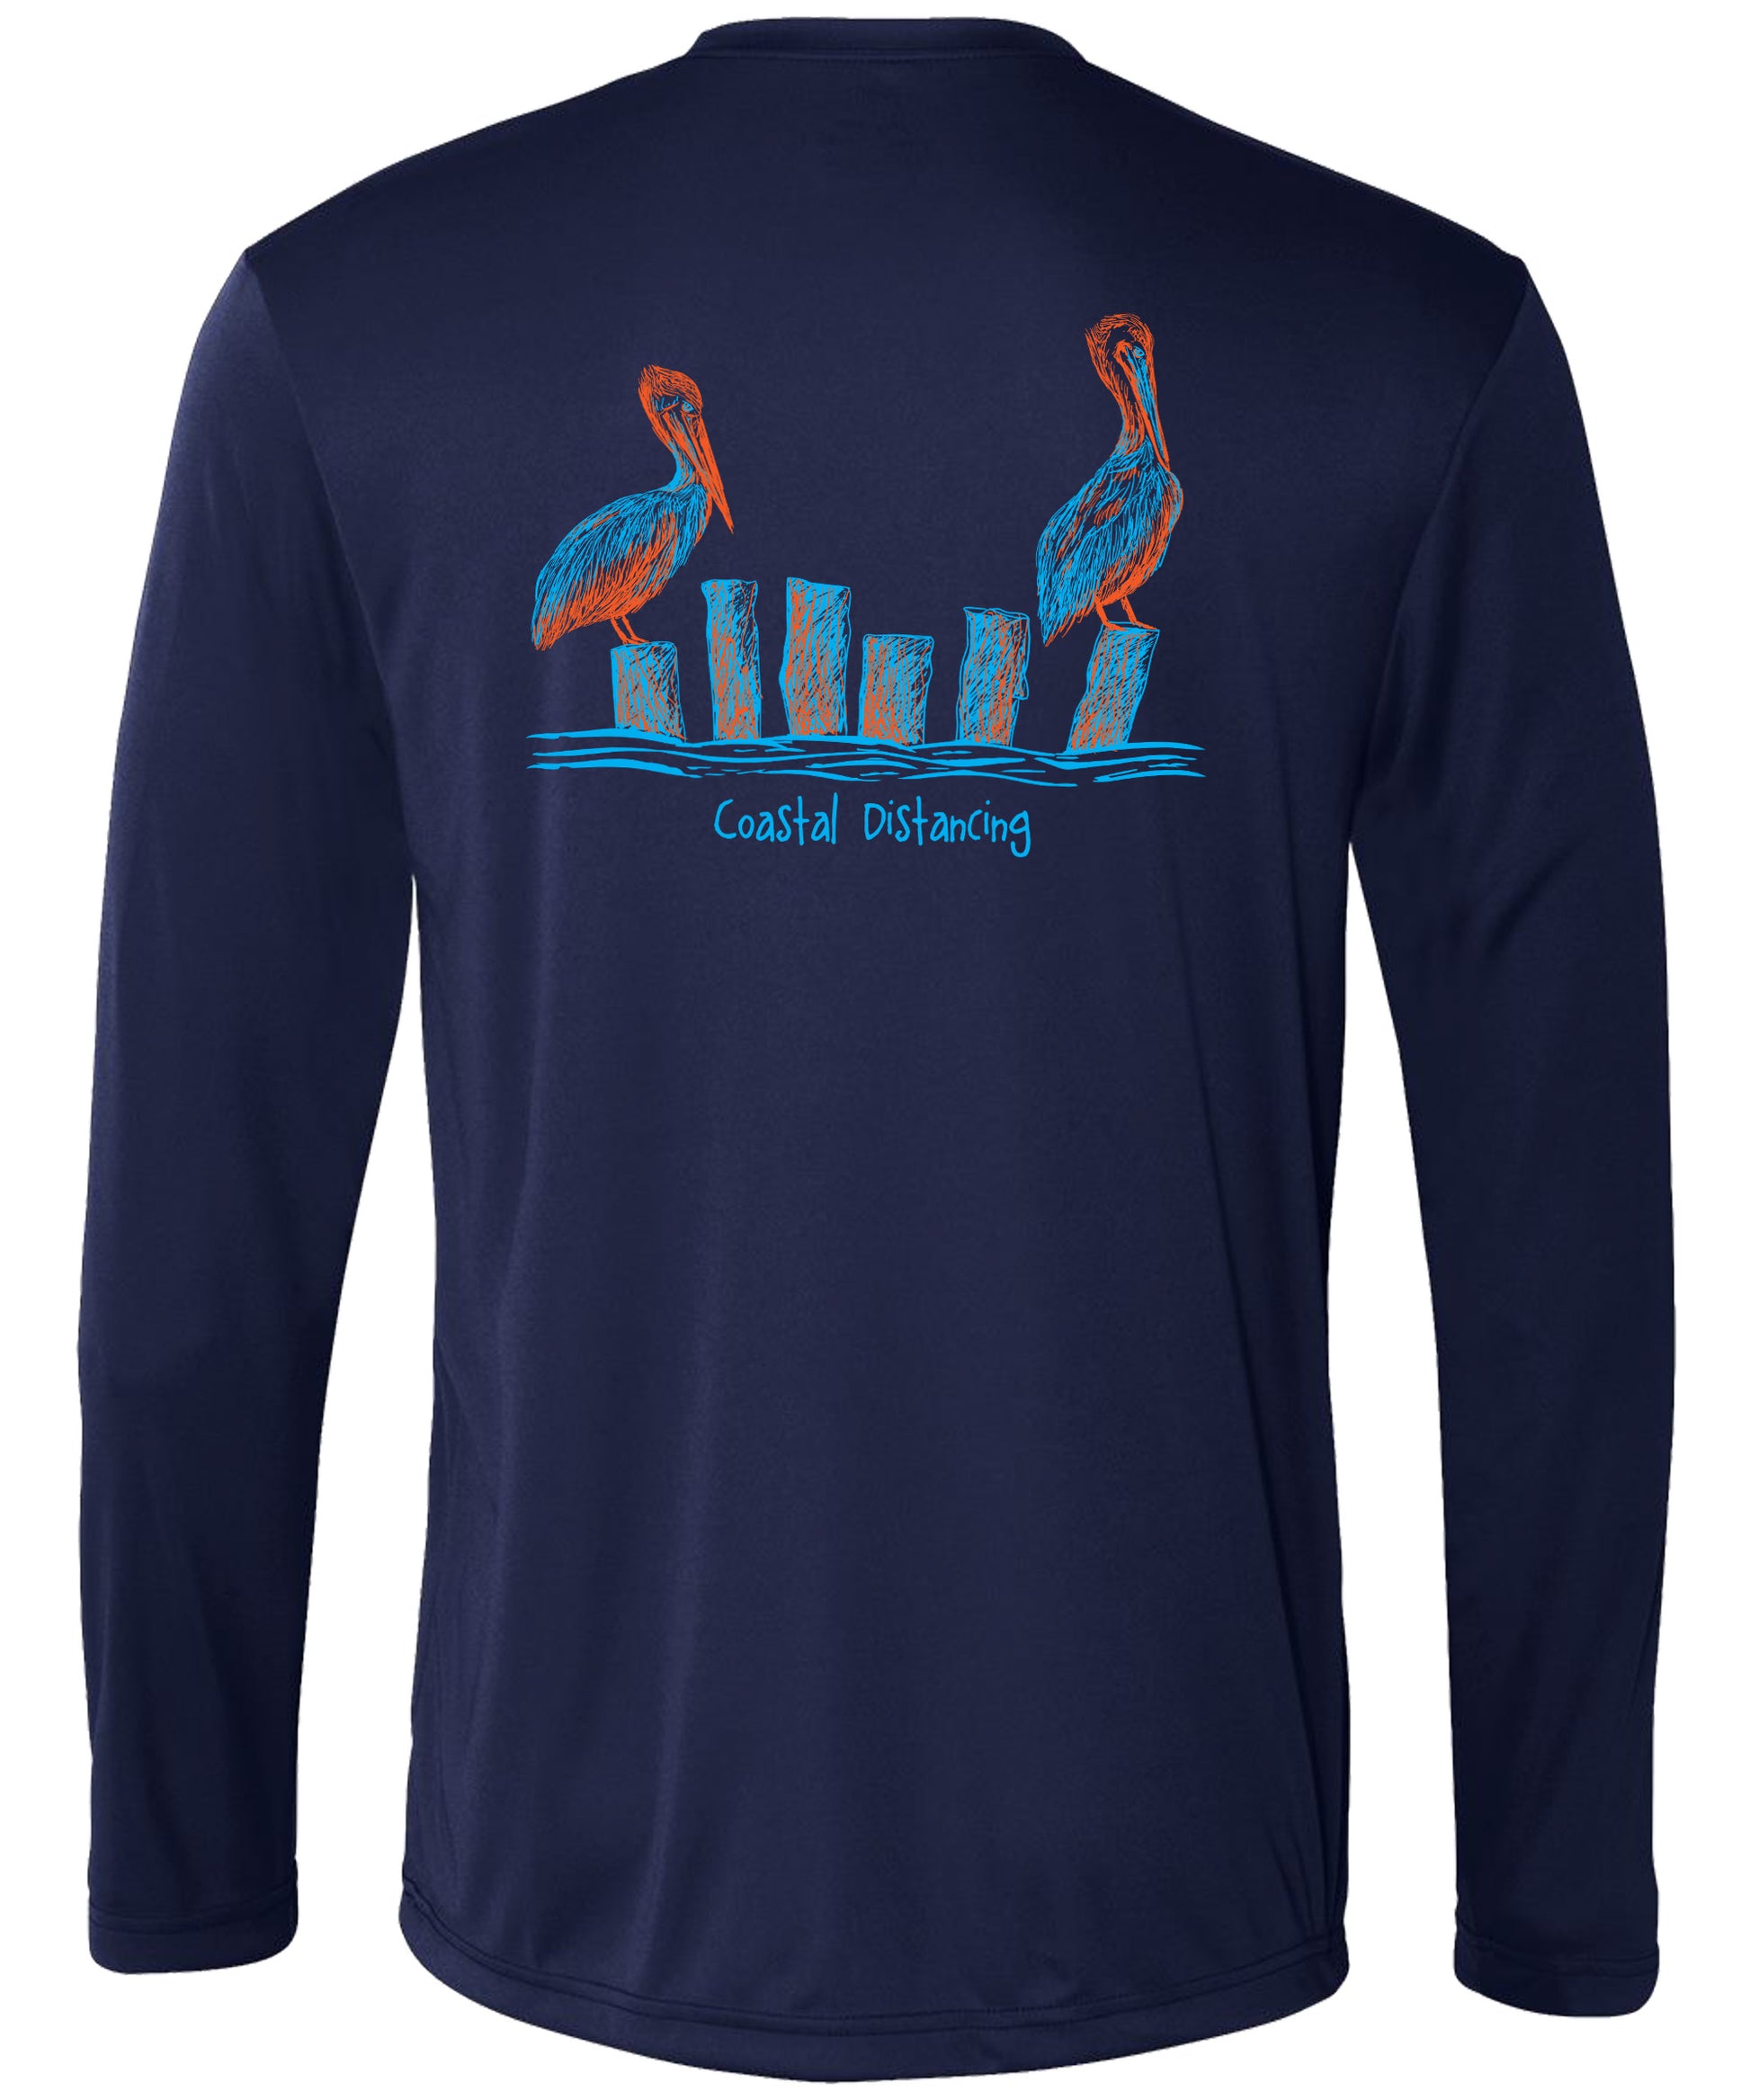 Pelicans Coastal Distancing Performance Dry-fit Navy Long Sleeve Shirts